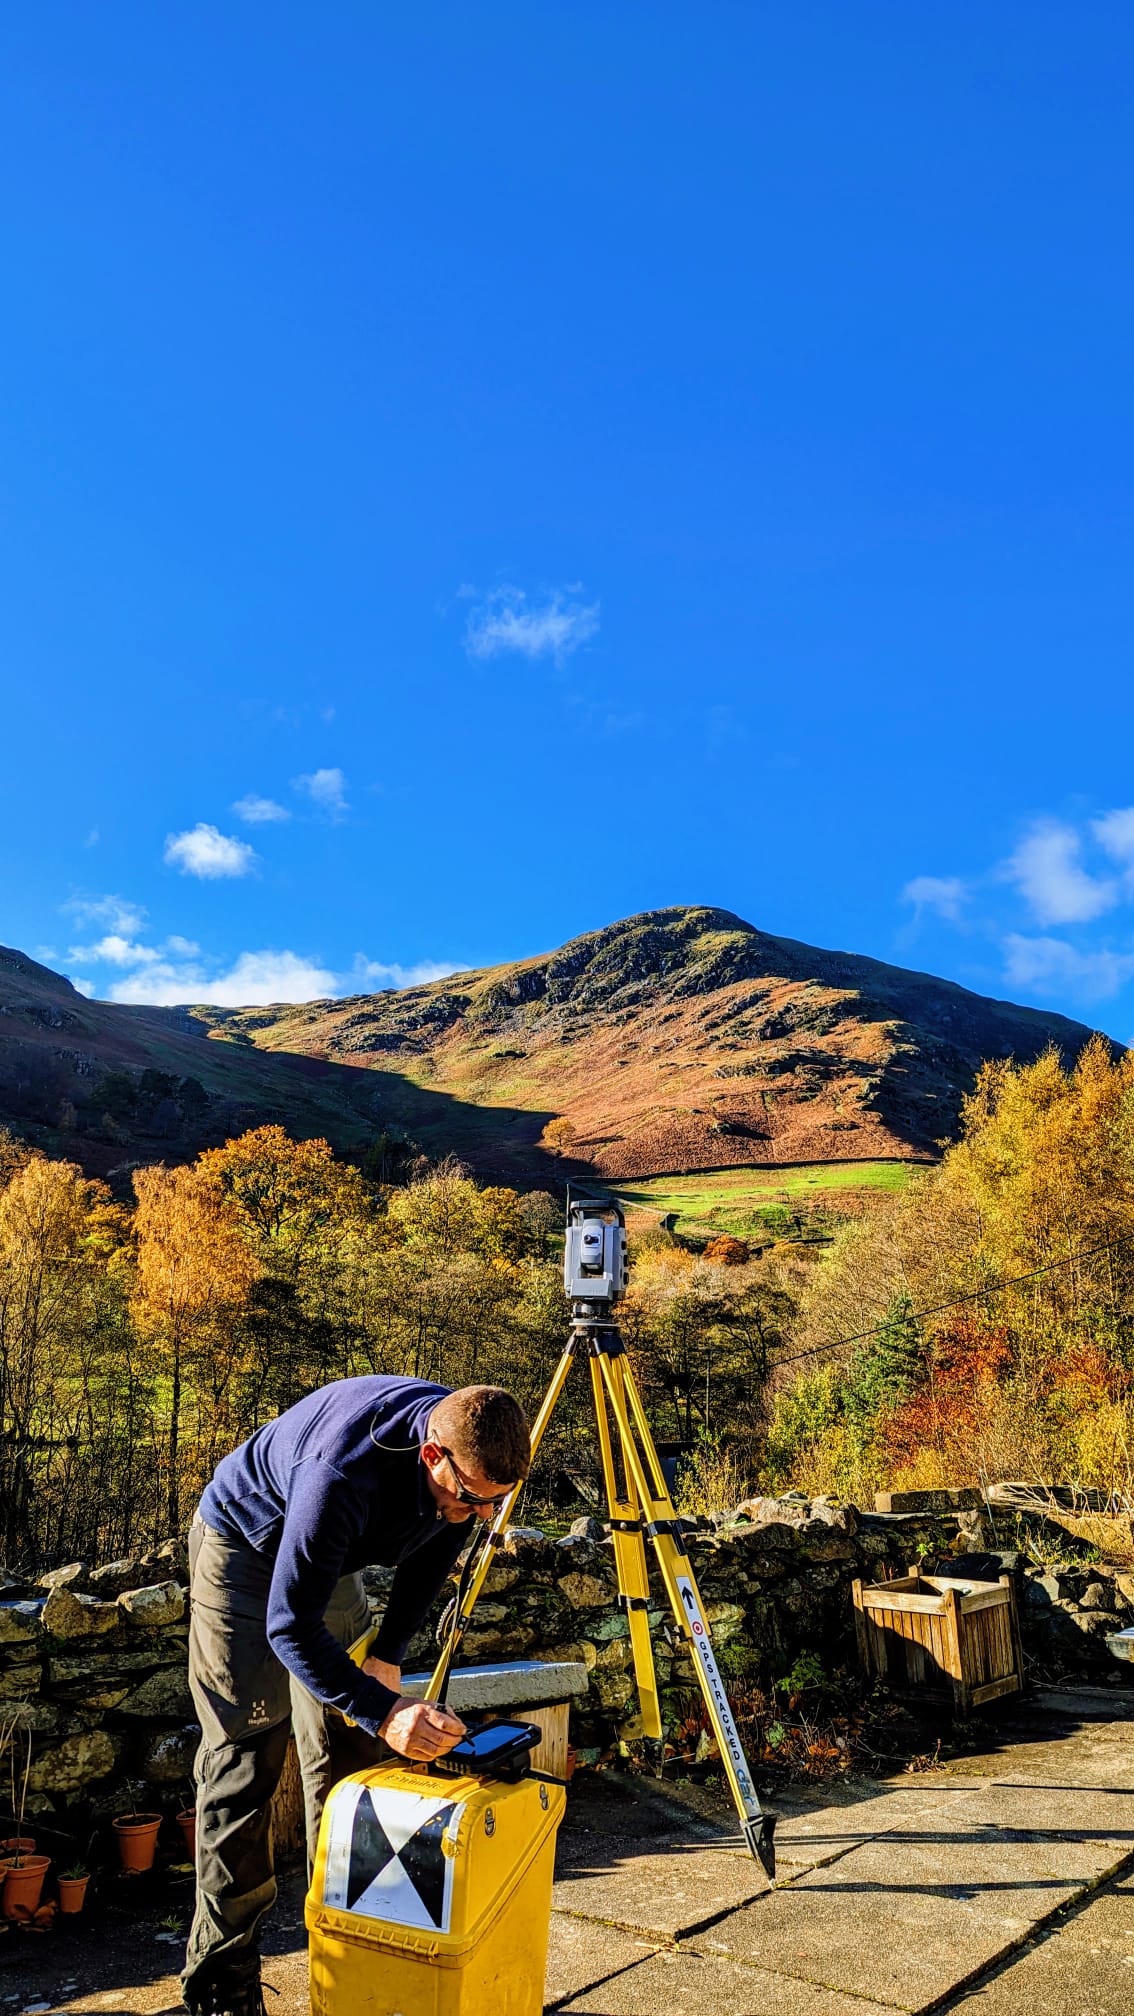 Surveyor working on his rugged handheld computer placed on a Yellow box on a patio. There is a total station on a Yellow tripod behind him. In the background is a mountain bathed in sunlight.